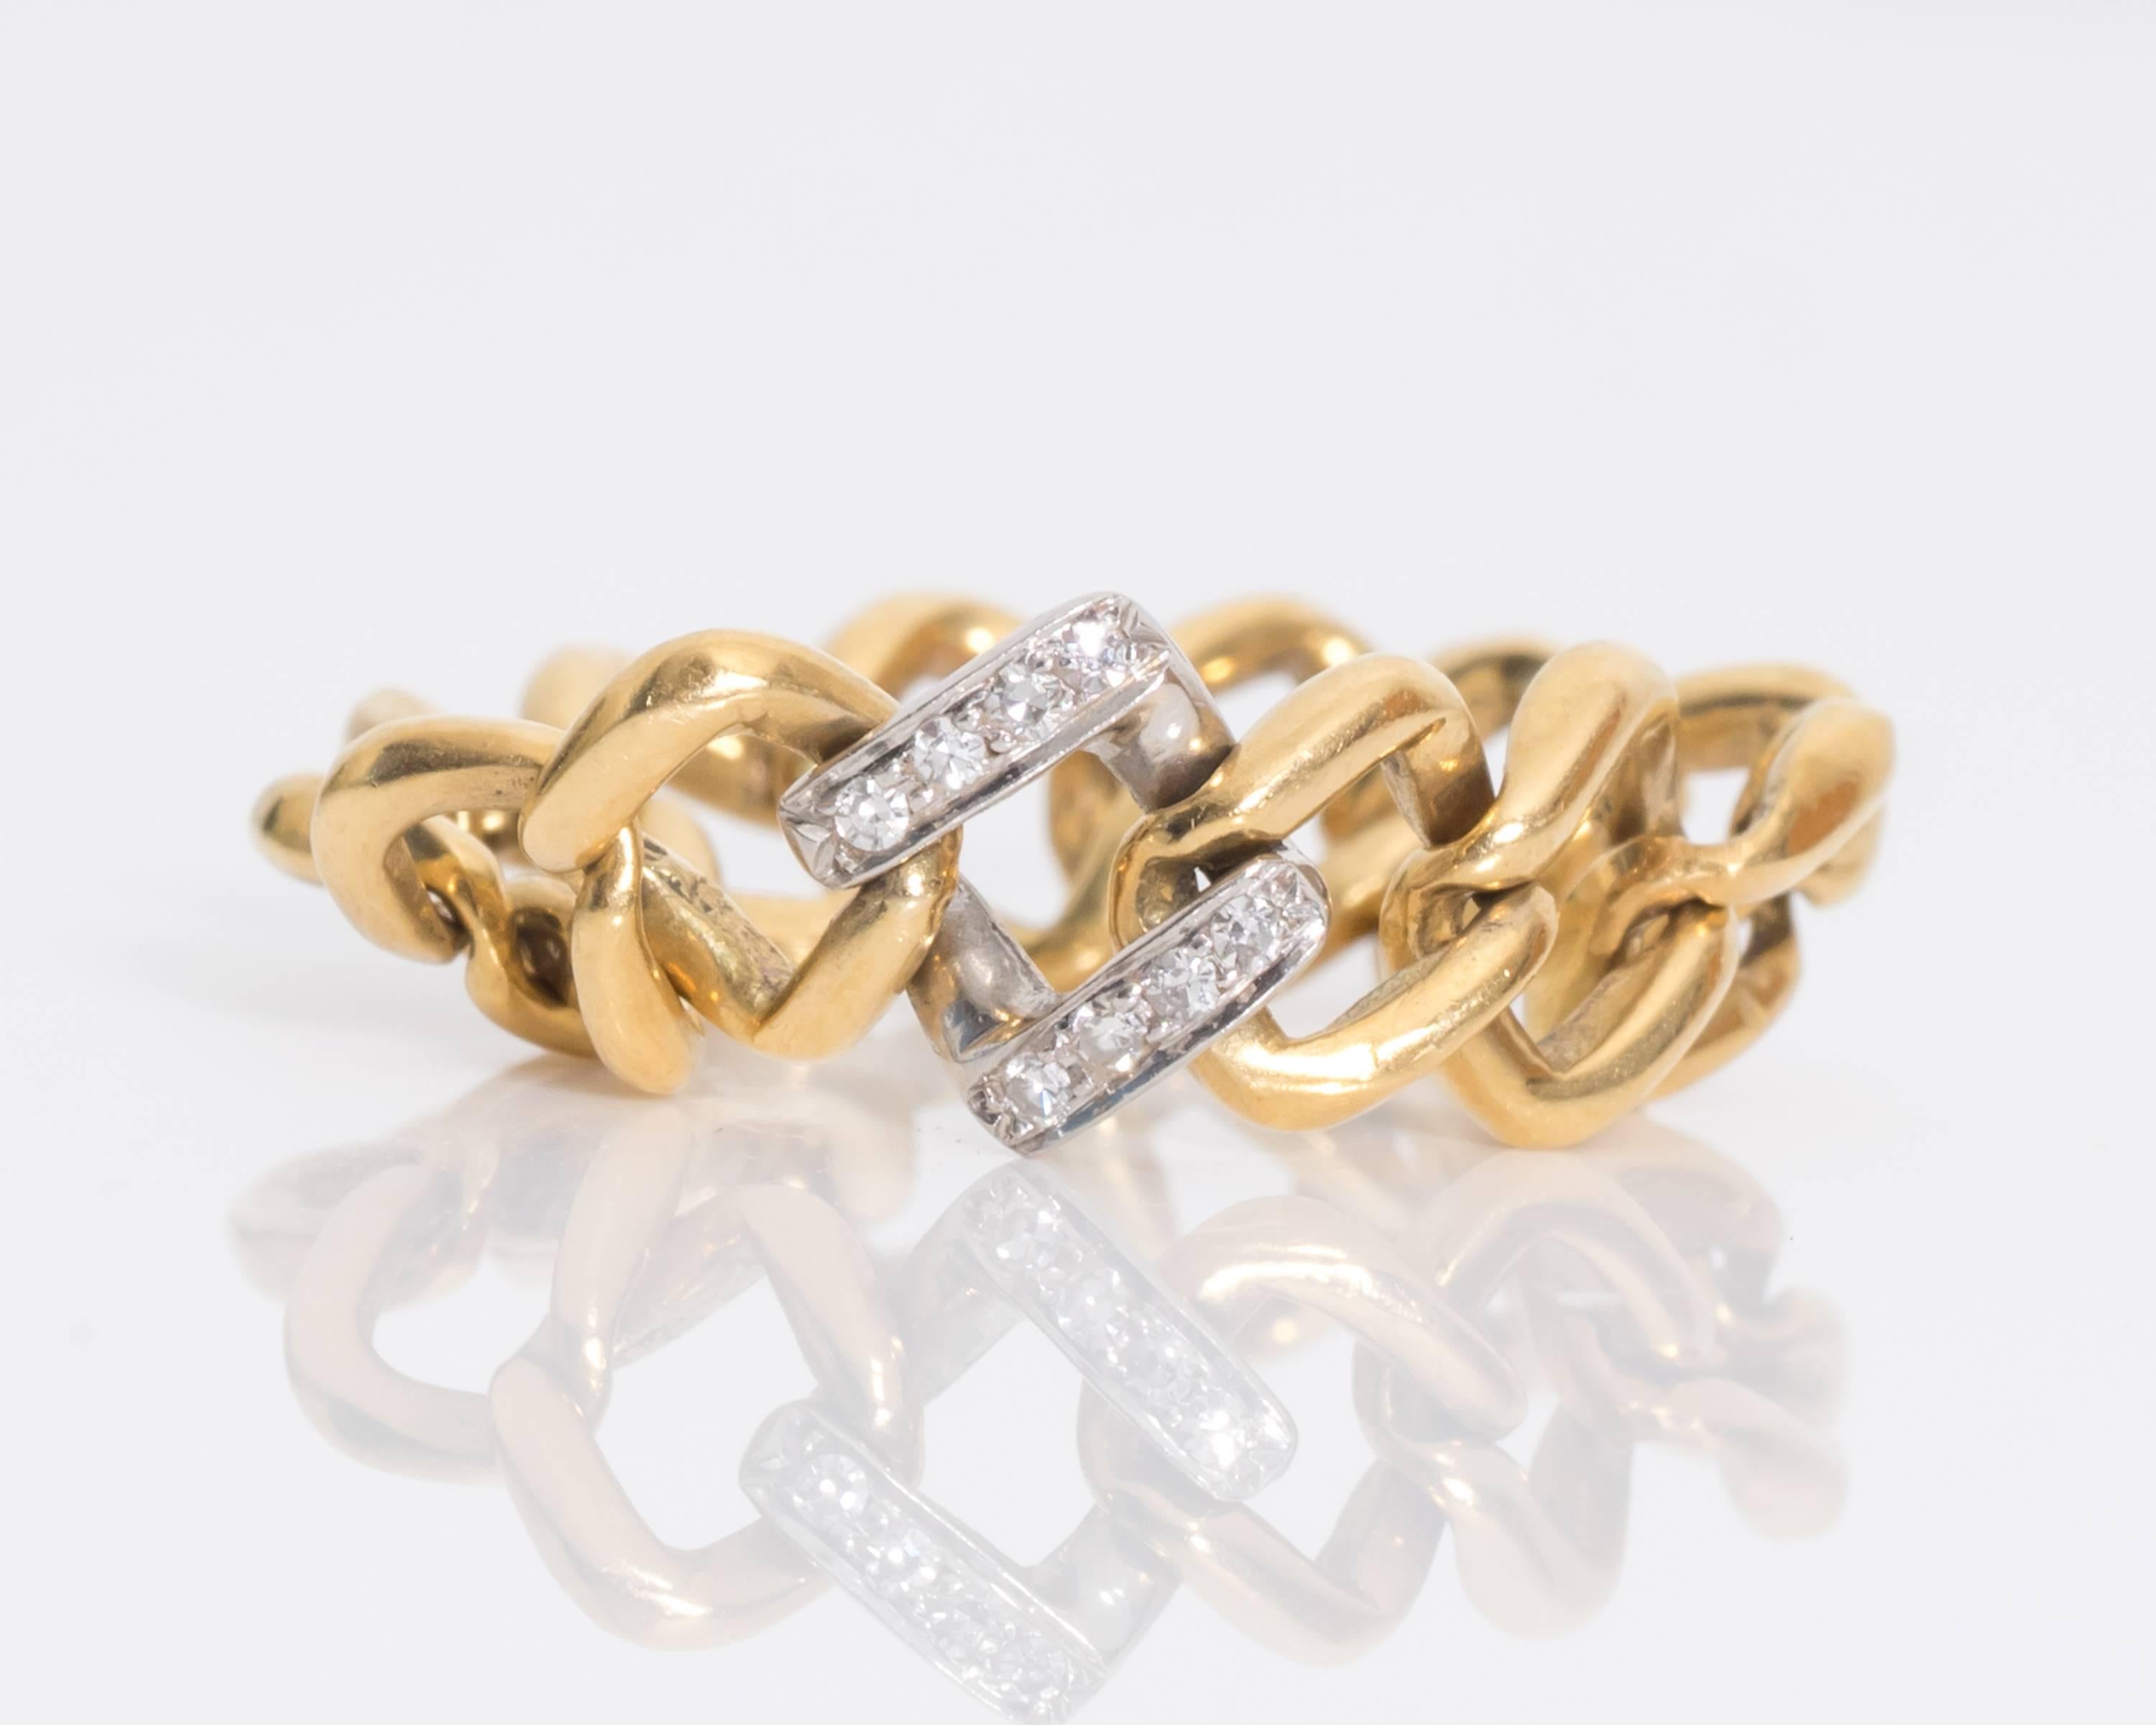 Beautiful Chain Link Ring from 1980s
Two-Tone Crafted - 18 Karat Yellow Gold and Platinum 
Features approximately 0.10 carats of Diamonds 
Fits Ring Size 5. It can be worn on any finger at any point, for example midi length or as a traditional ring.